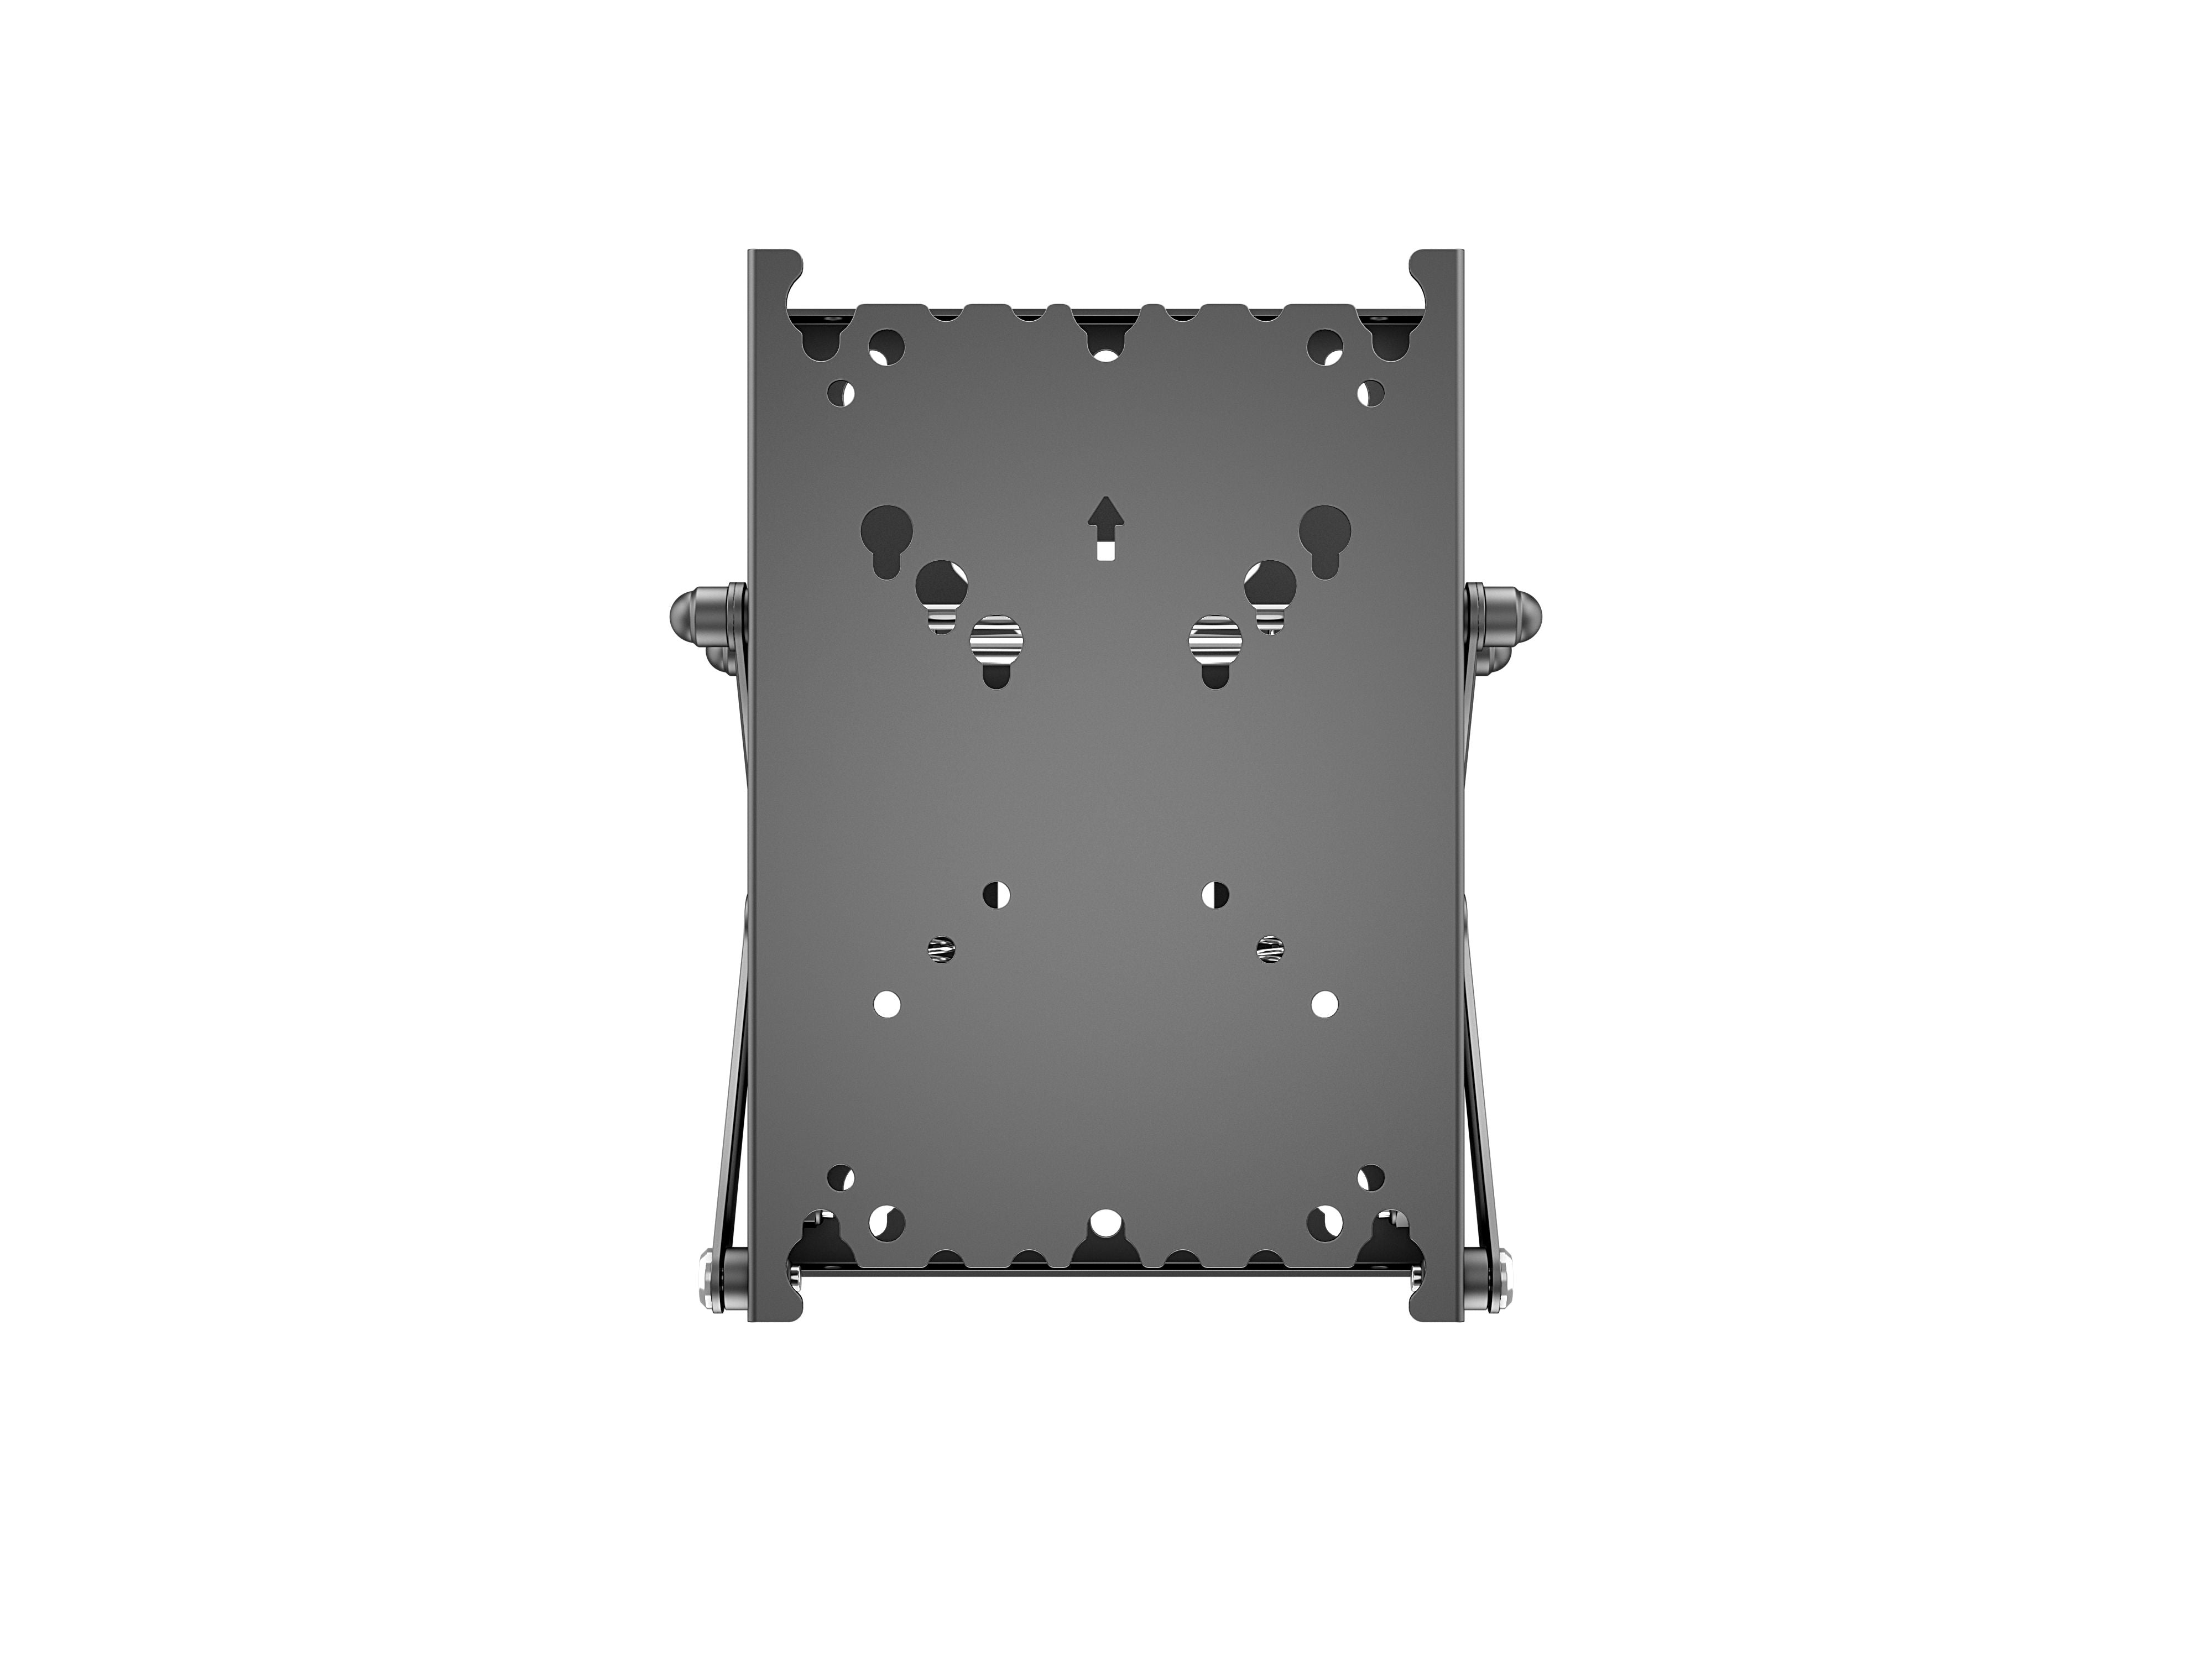 Push-In Pop-Out Video Wall Mount for Small Monitors 13"-32"